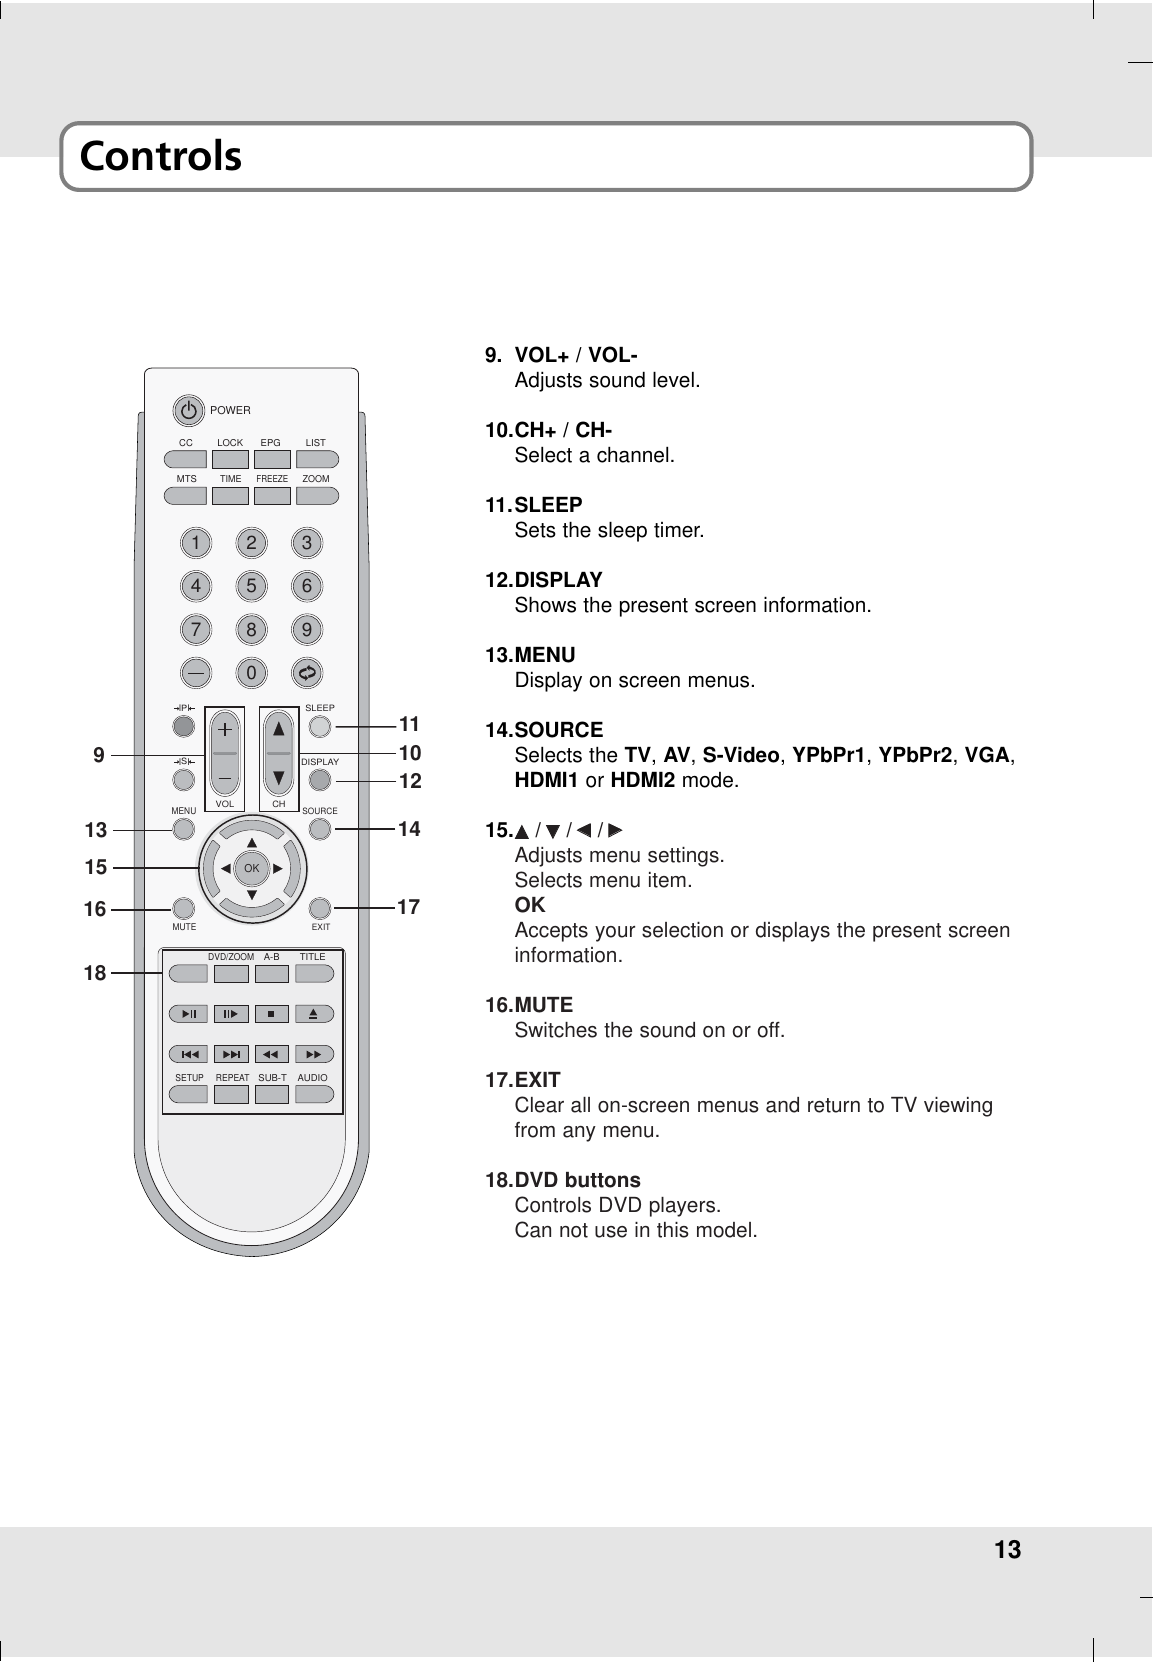 13ControlsIPISLEEPISIDISPLAYPOWERCCMTSTIMEFREEZEZOOMLOCK EPG LIST1472580396MENUSOURCEMUTEEXITVOL CHOKDVD/ZOOMA-B TITLESETUP REPEATSUB-T AUDIO9. VOL+ / VOL-Adjusts sound level.10.CH+ / CH-Select a channel.11.SLEEPSets the sleep timer.12.DISPLAYShows the present screen information.13.MENUDisplay on screen menus.14.SOURCESelects the TV, AV,S-Video, YPbPr1, YPbPr2,VGA,HDMI1 or HDMI2 mode.15.DD/EE/FF/GGAdjusts menu settings.Selects menu item.OKAccepts your selection or displays the present screeninformation.16.MUTESwitches the sound on or off.17.EXITClear all on-screen menus and return to TV viewingfrom any menu.18.DVD buttonsControls DVD players.Can not use in this model.1618171315141112910